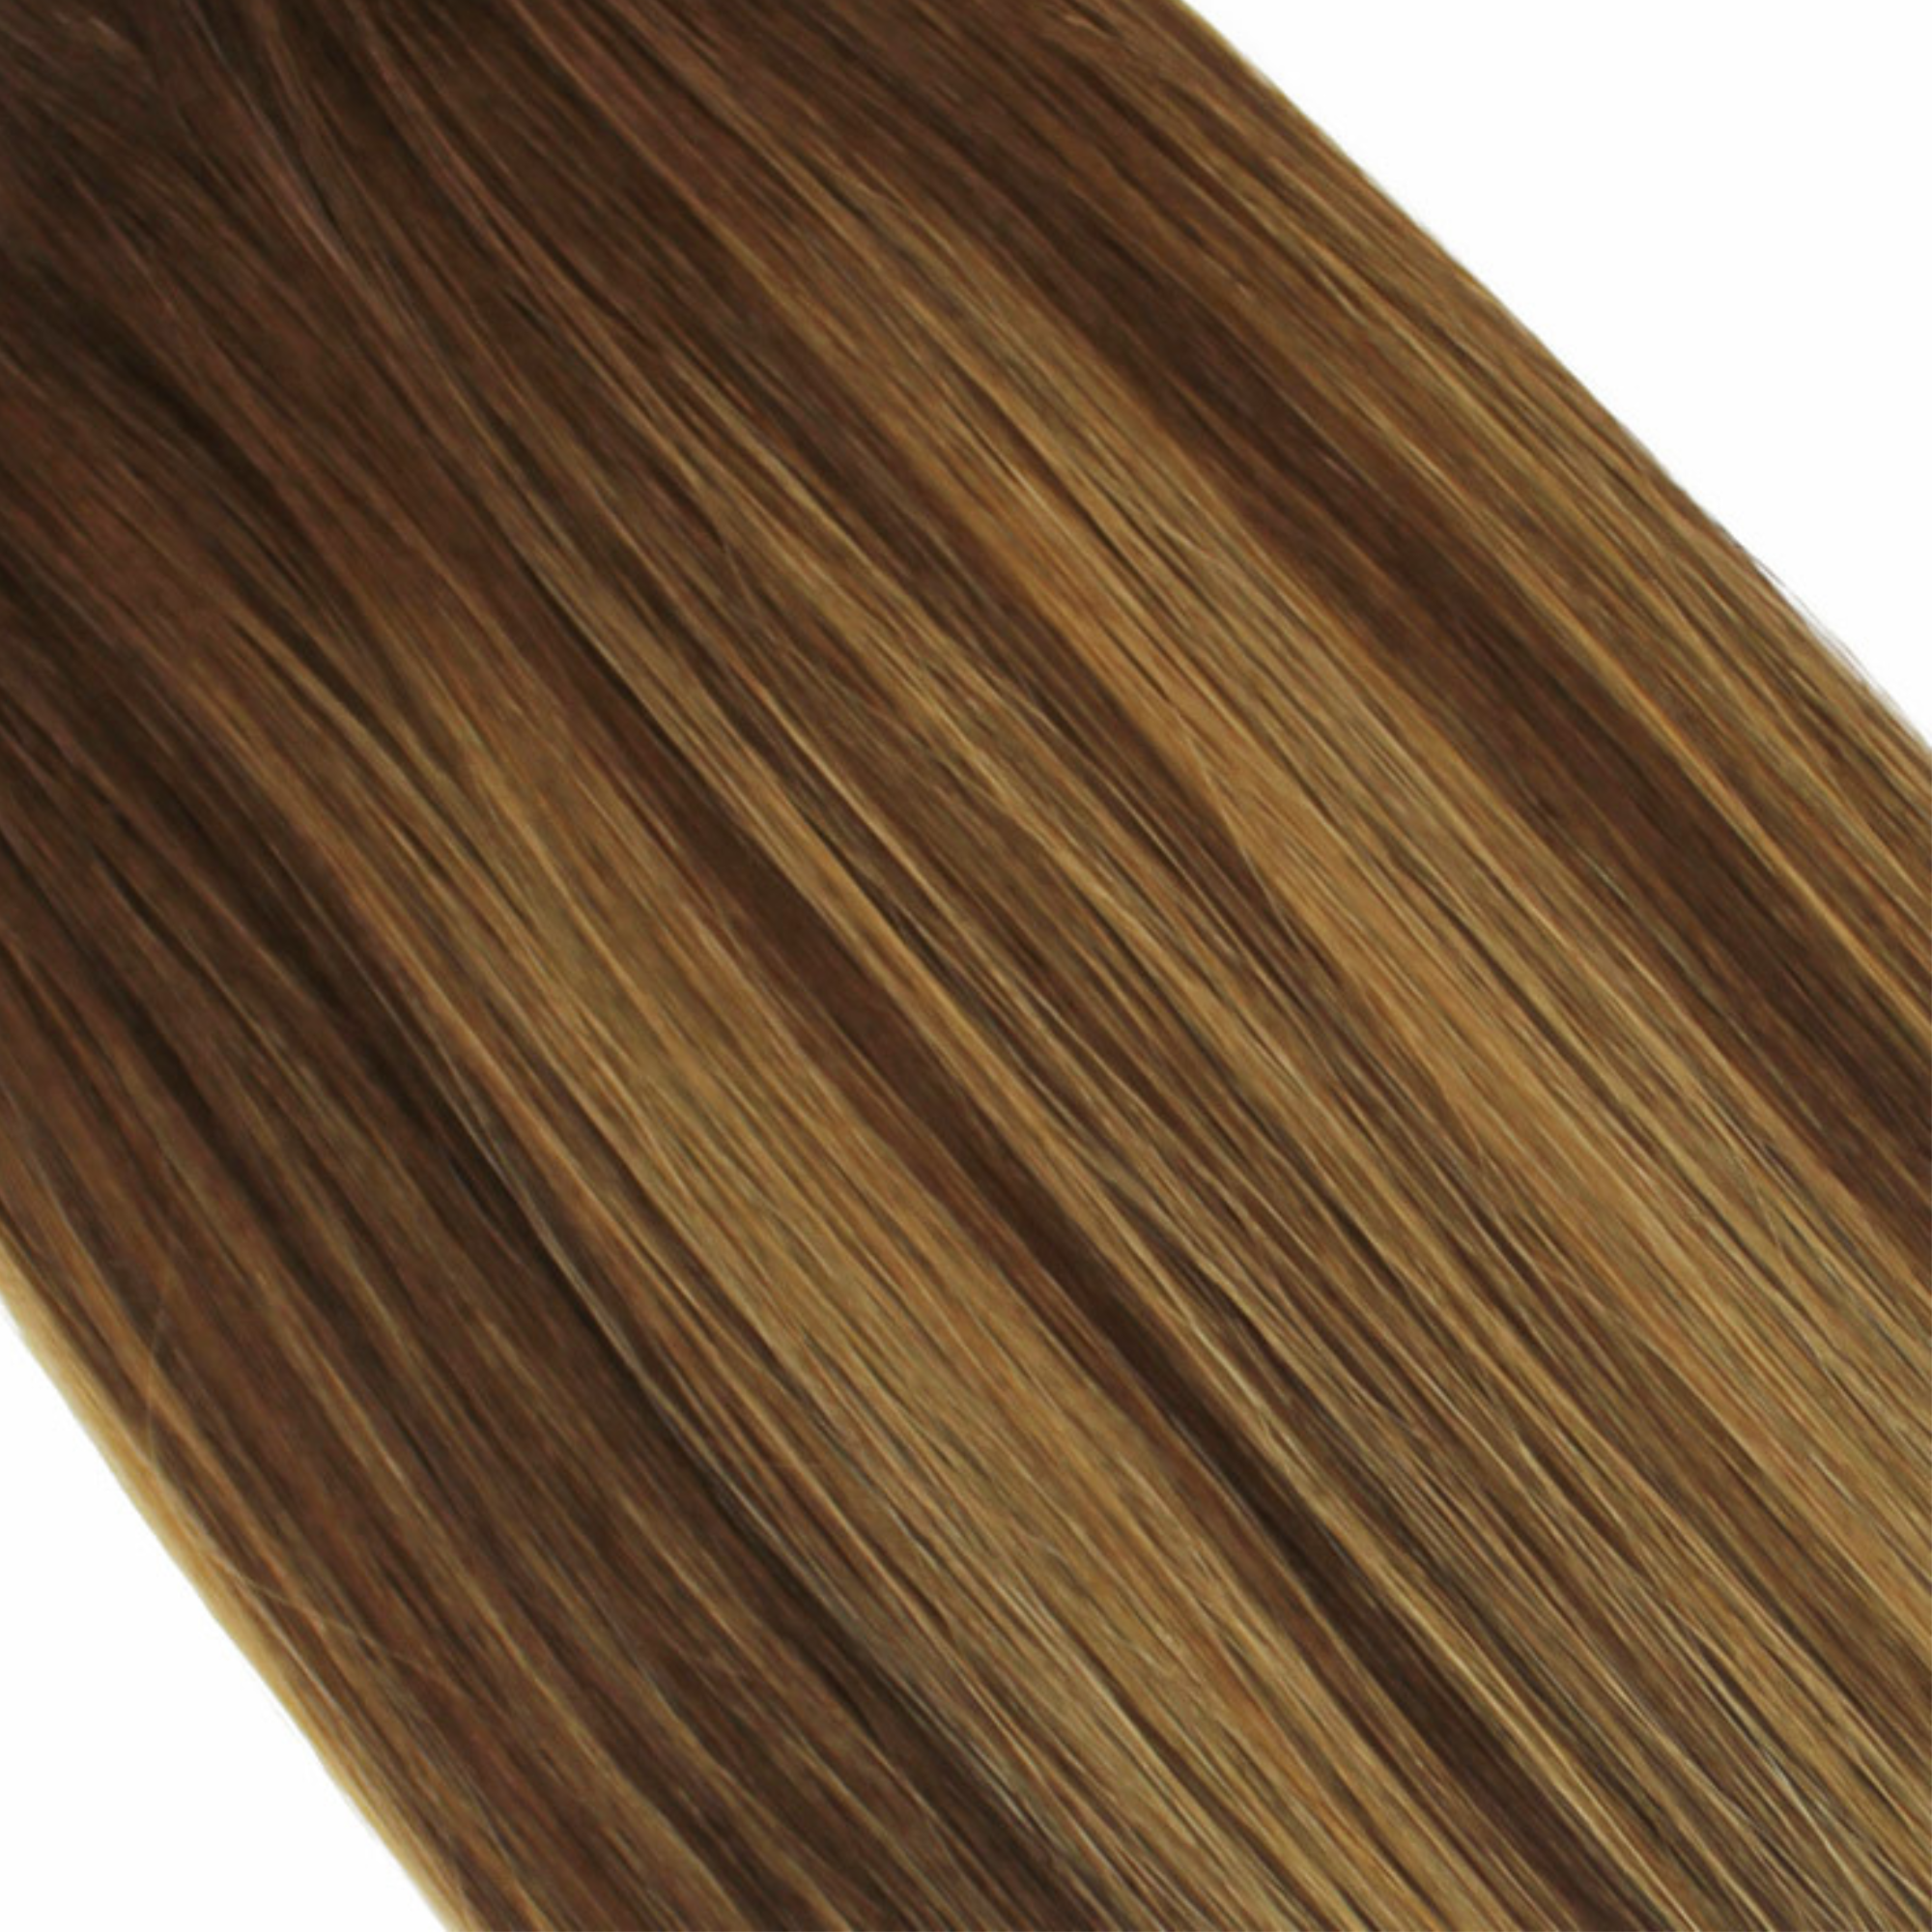 "hair rehab london 14" tape hair extensions shade swatch titled rooted bronze"